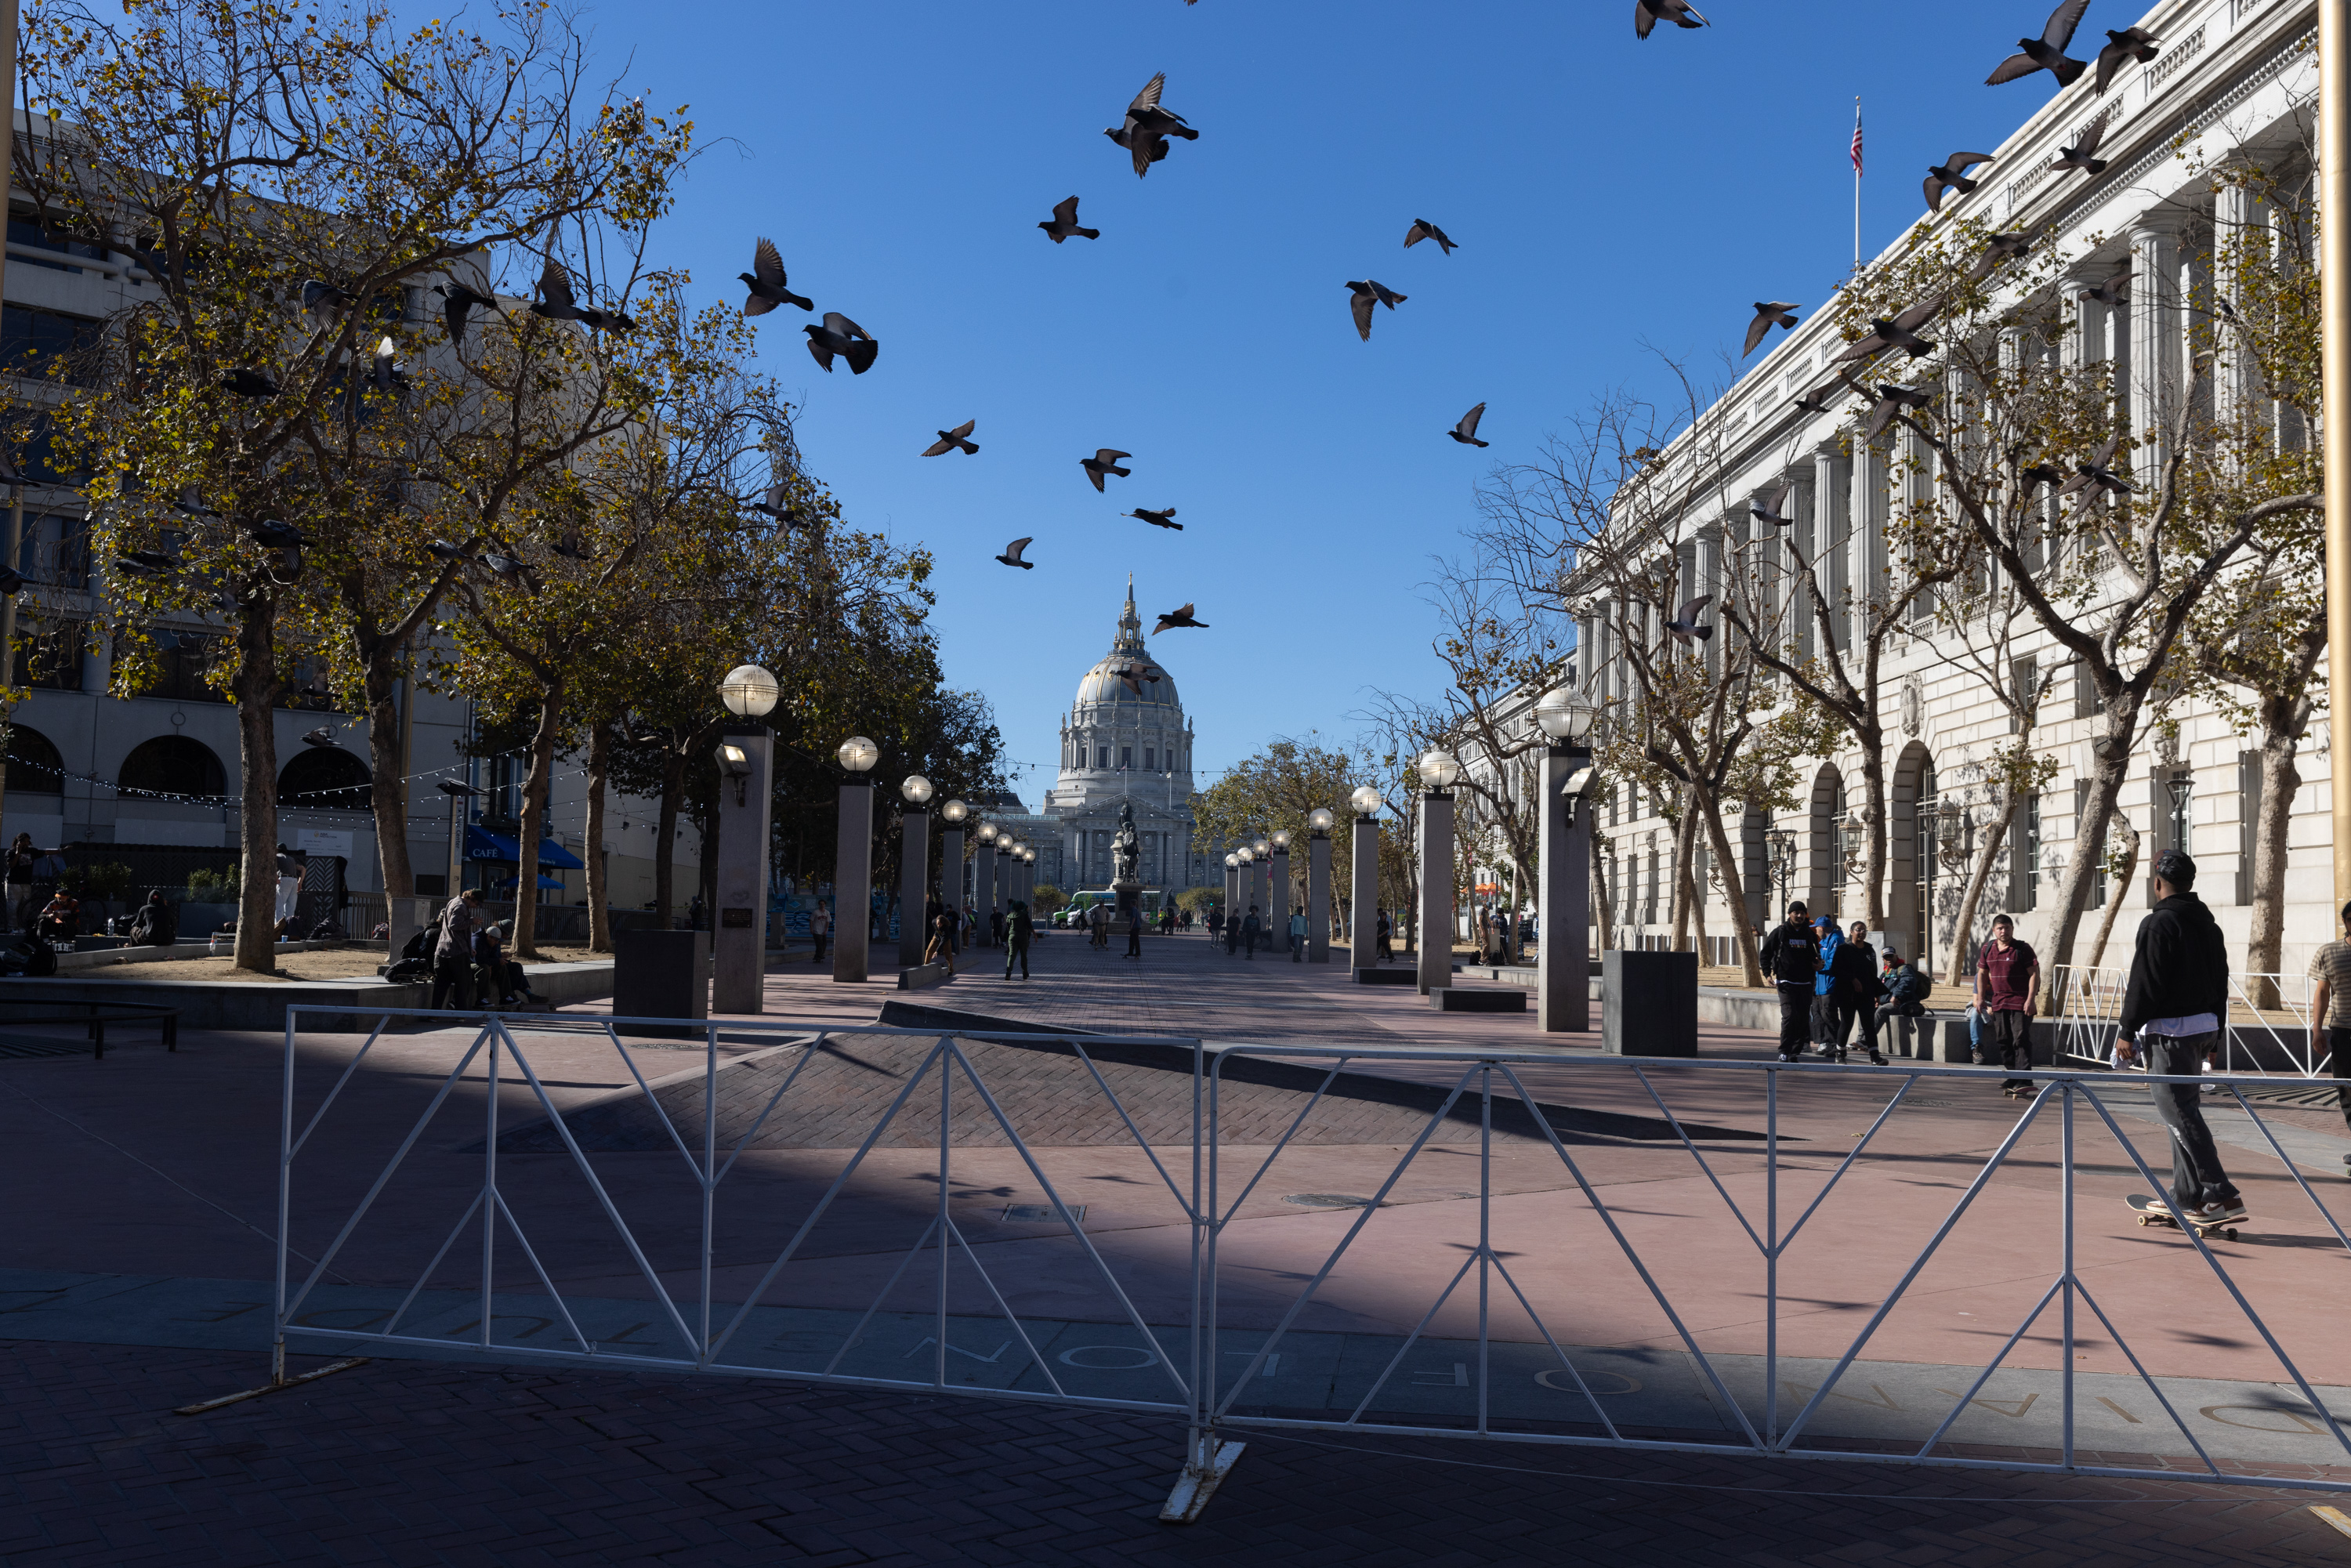 Pigeons fly over a mostly empty plaza as a skateboarder rides past.